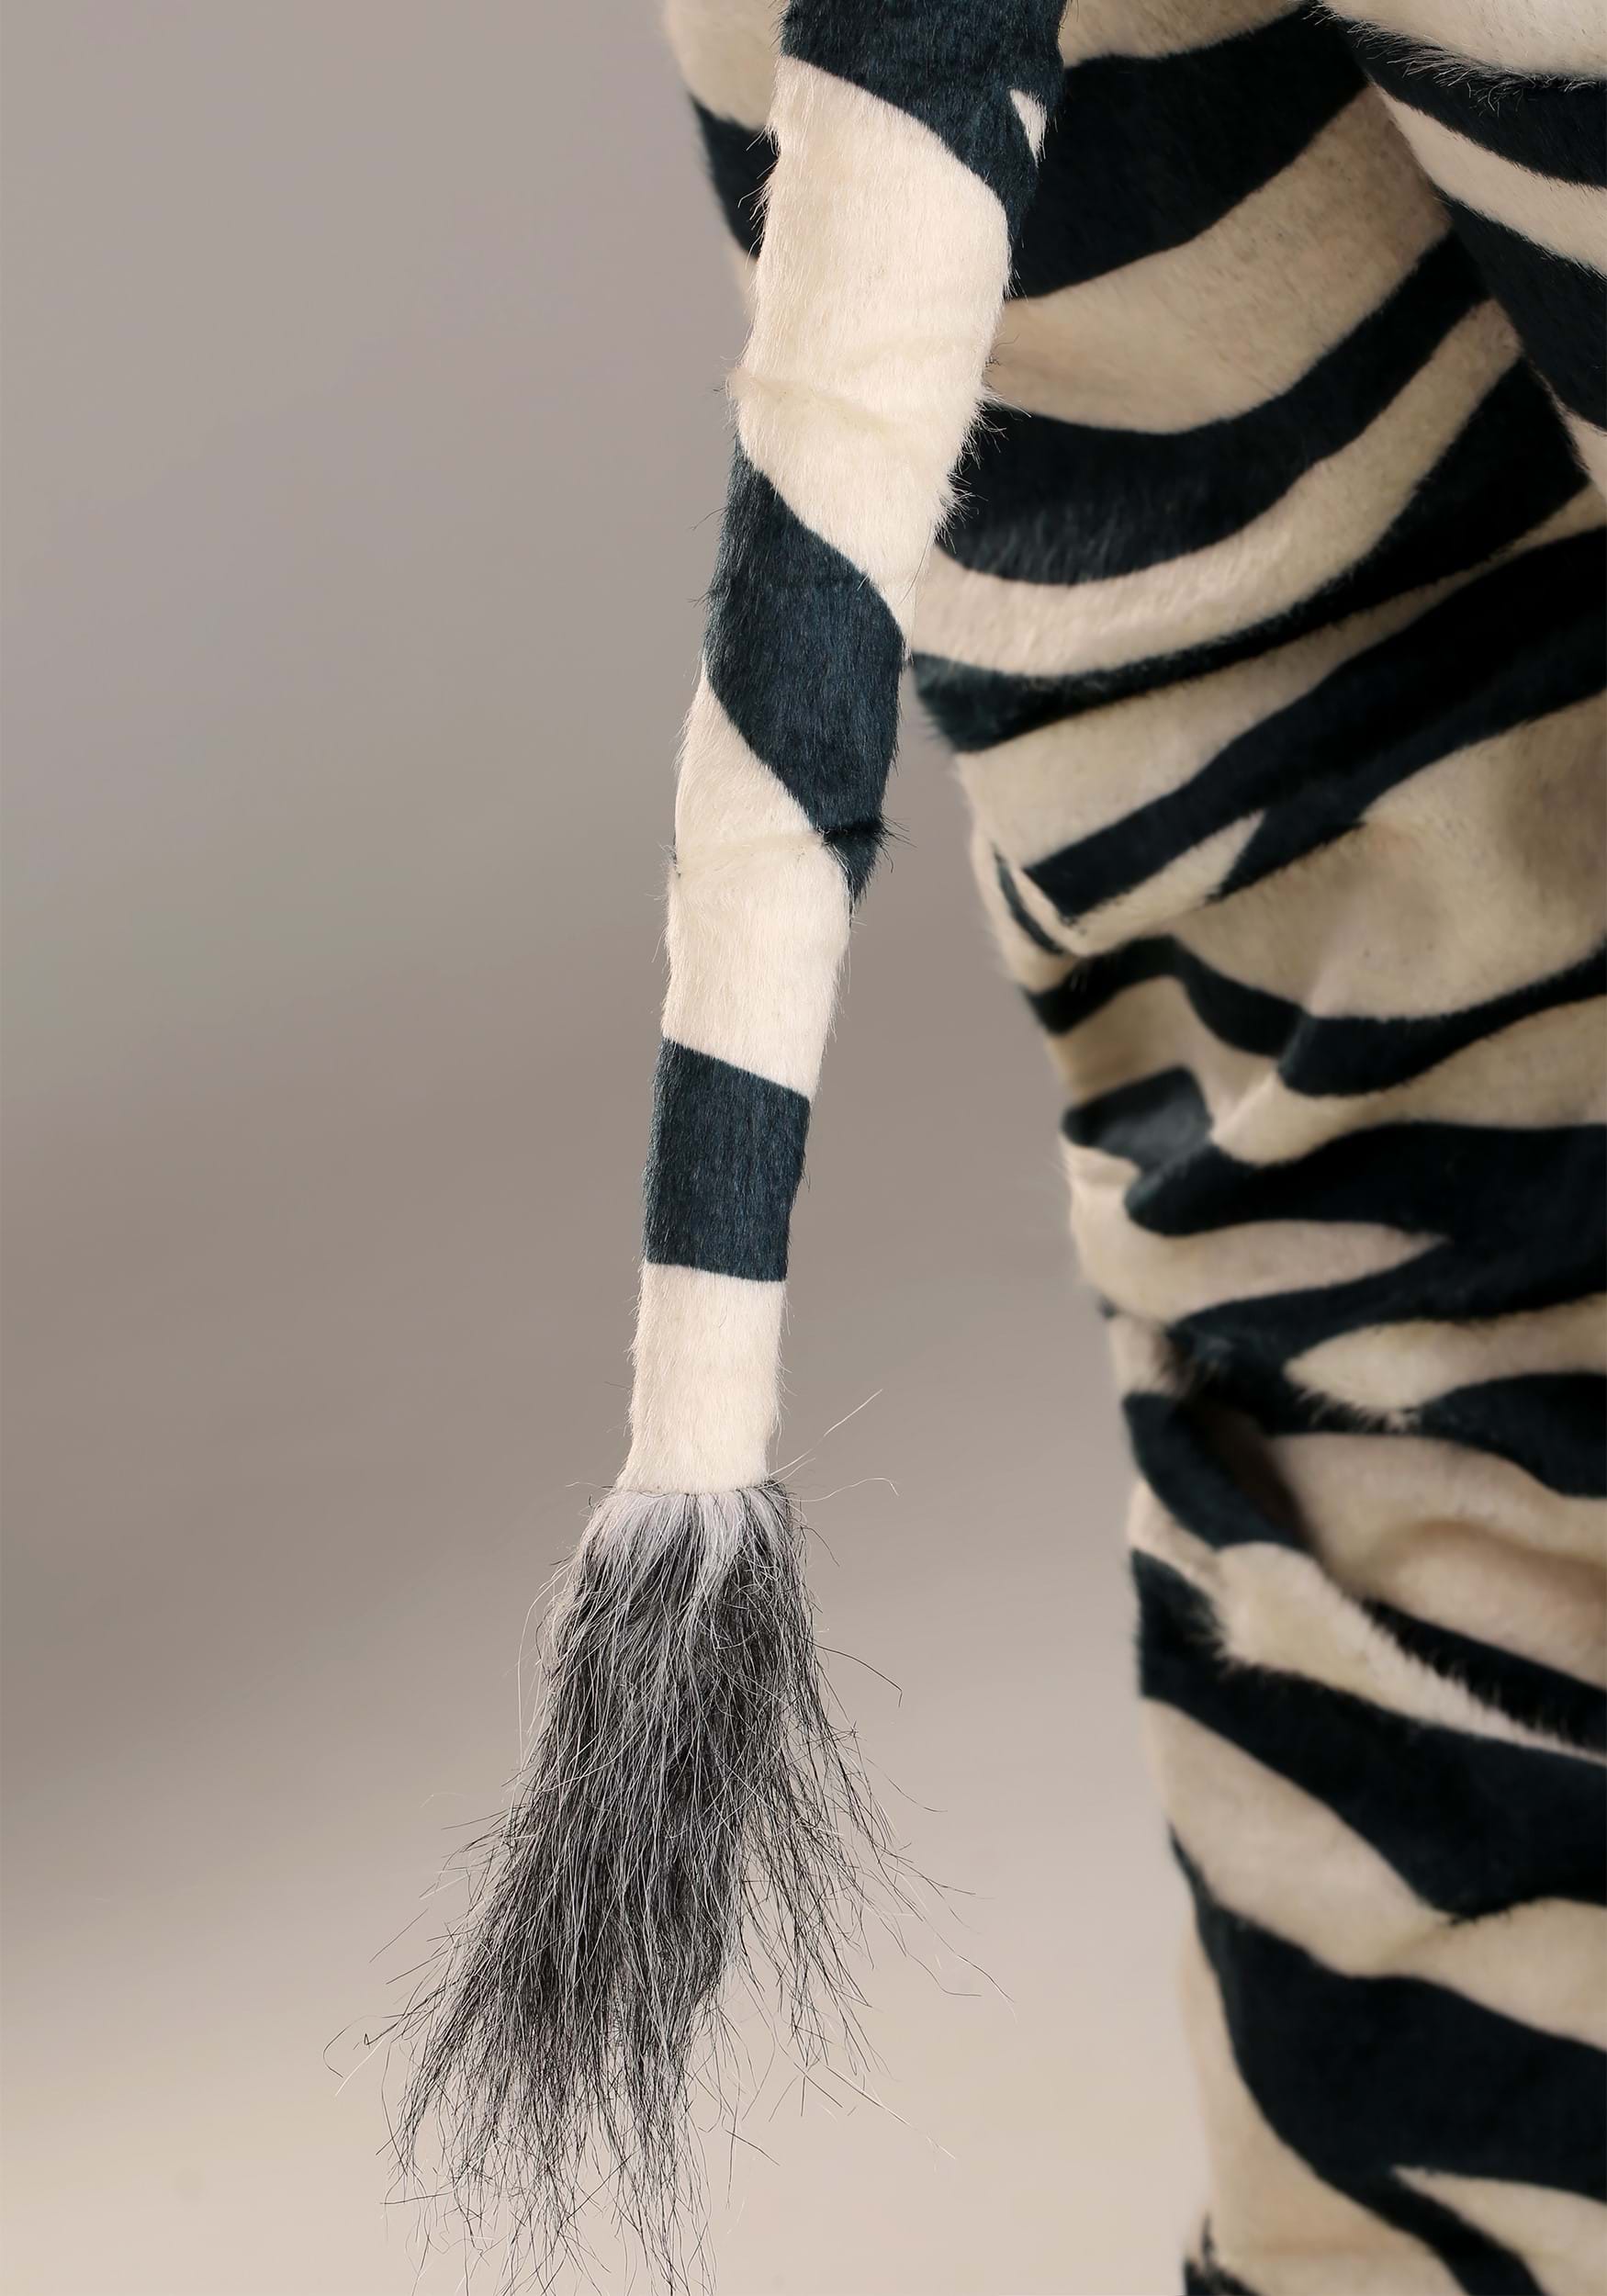 Zebra Suit With Mouth Mover Mask For Adults